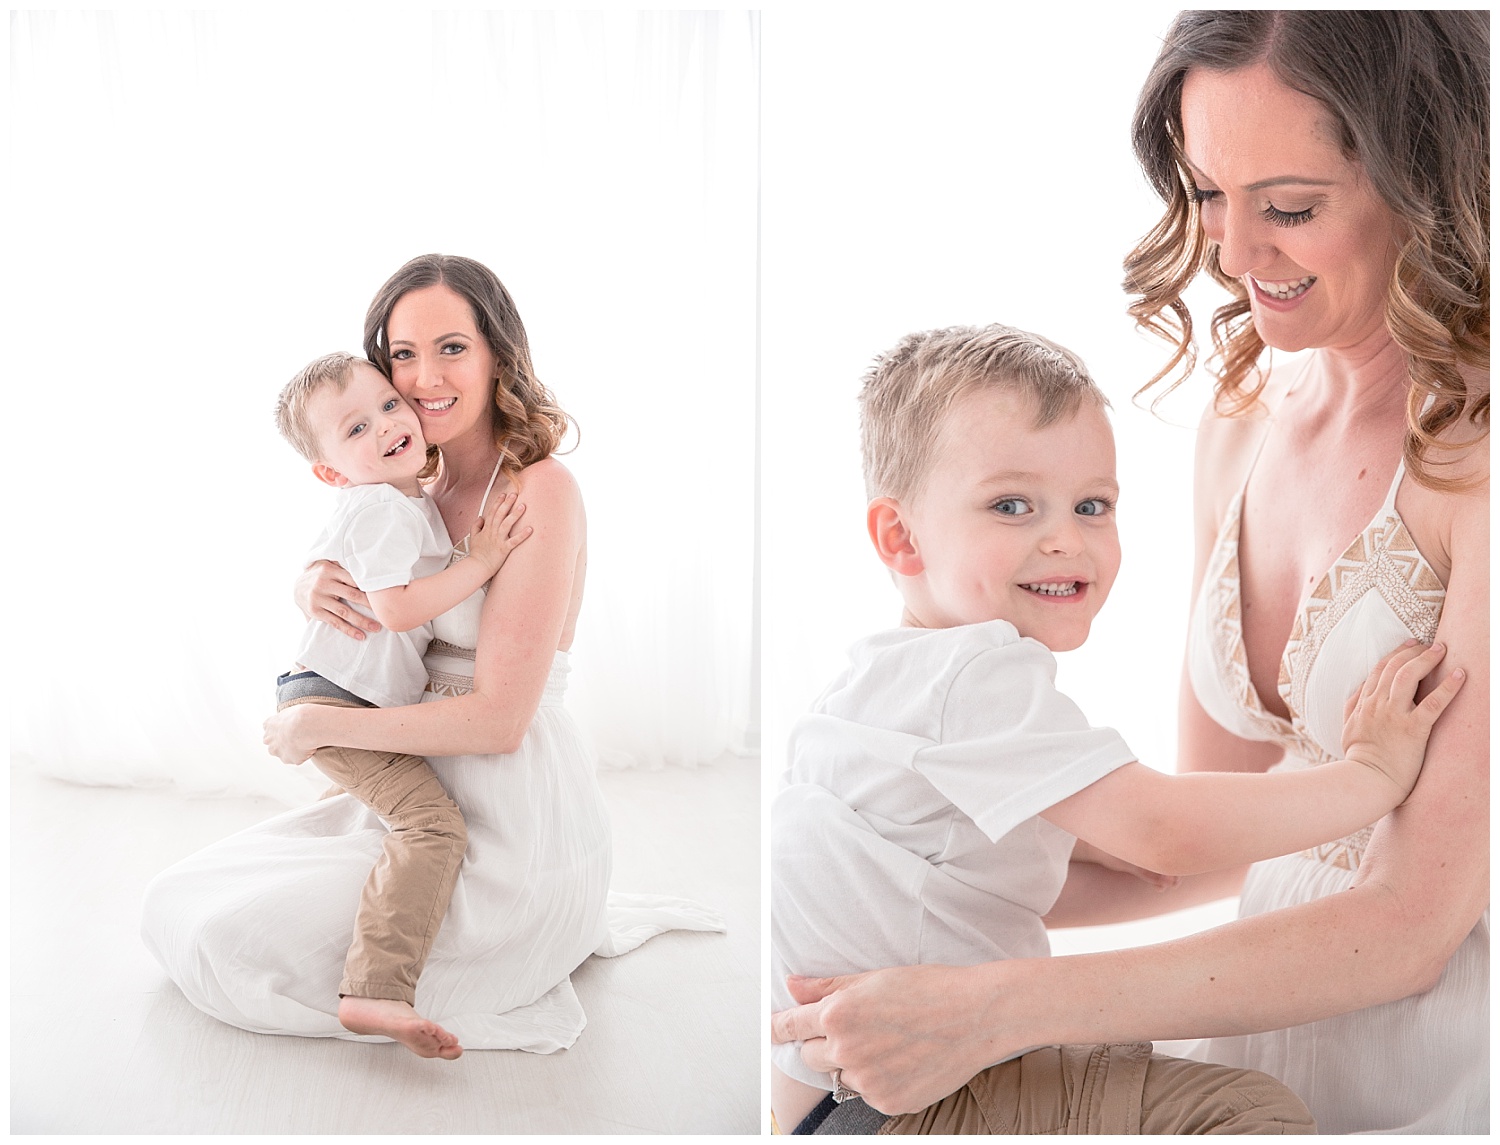 3 year old son hugging his mom and smiling big for the camera in moorestown new jersey studio